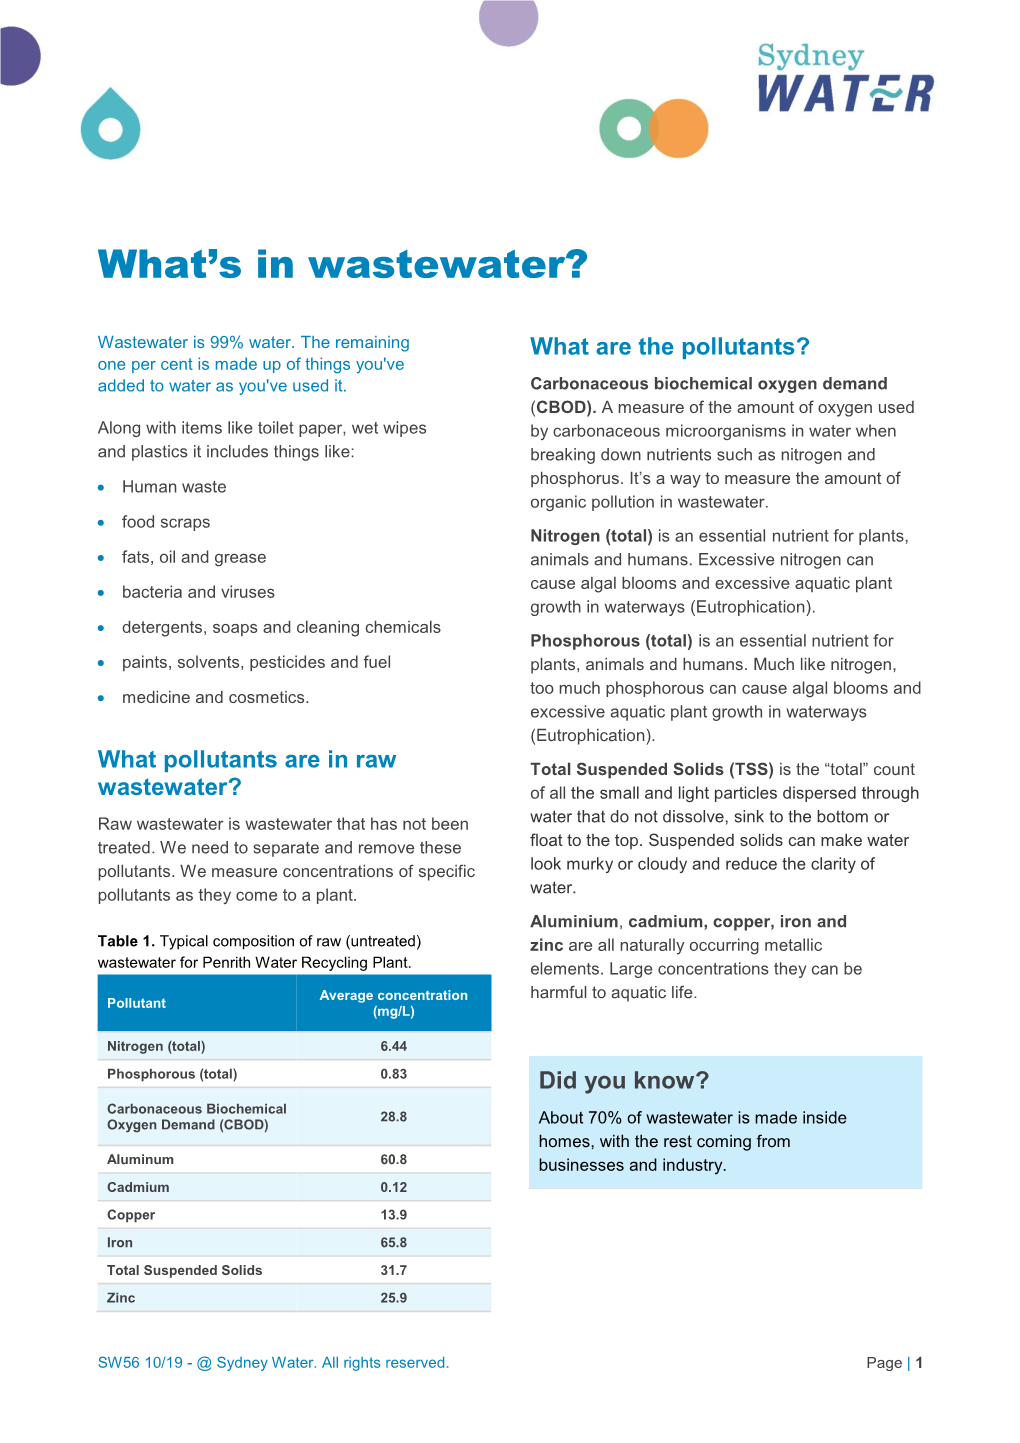 What's in Wastewater?